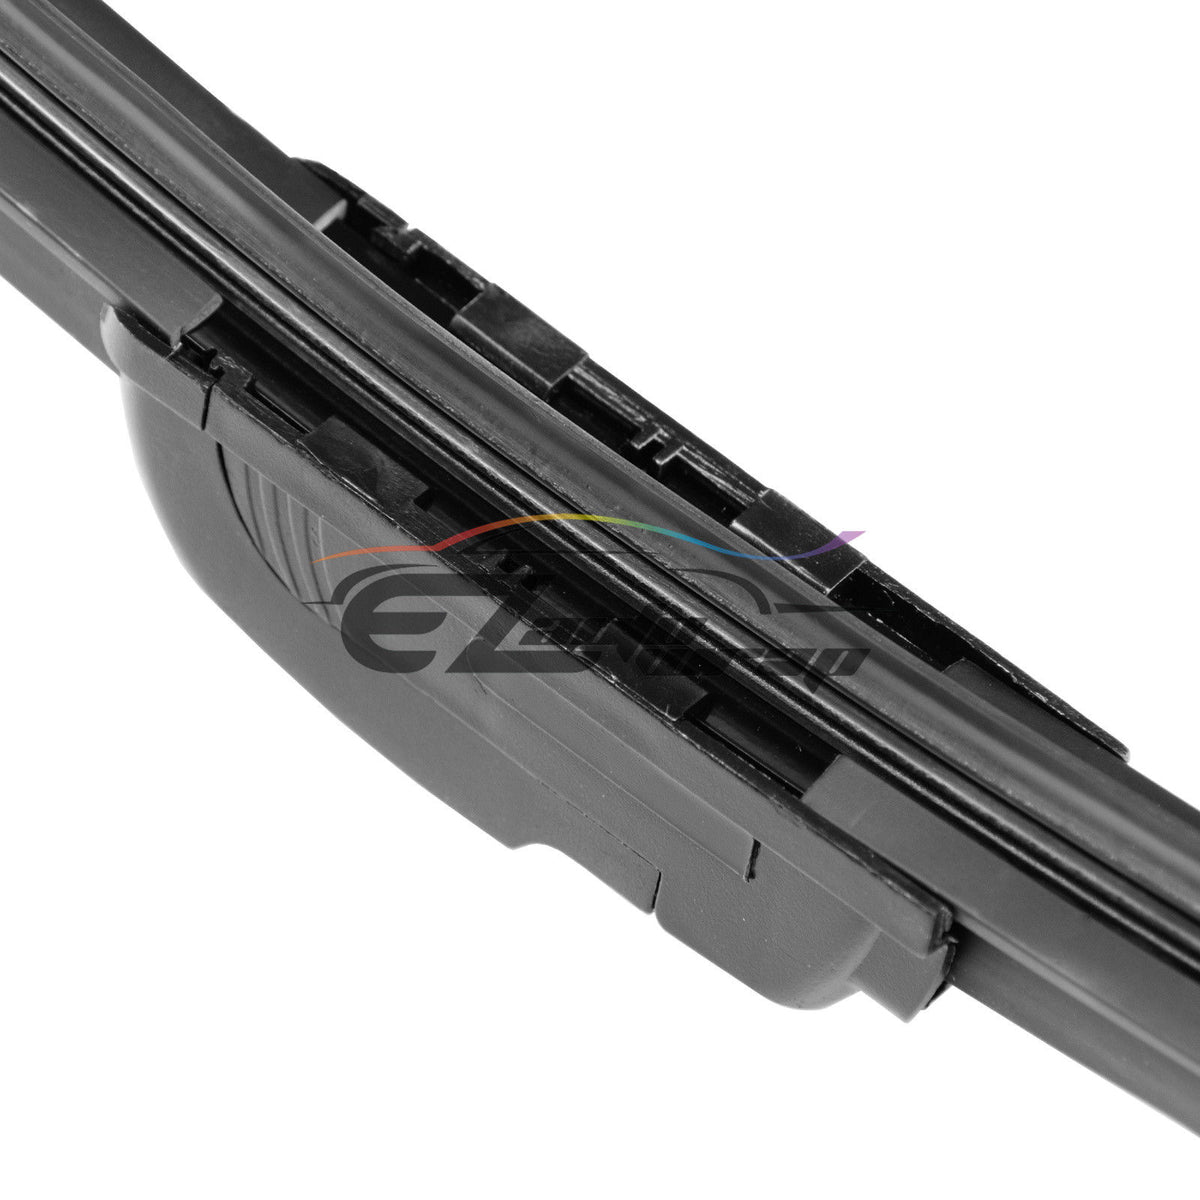 7720 CAR MIRROR WIPER USED FOR ALL KINDS OF CARS AND VEHICLES FOR CLEA —  Deodap